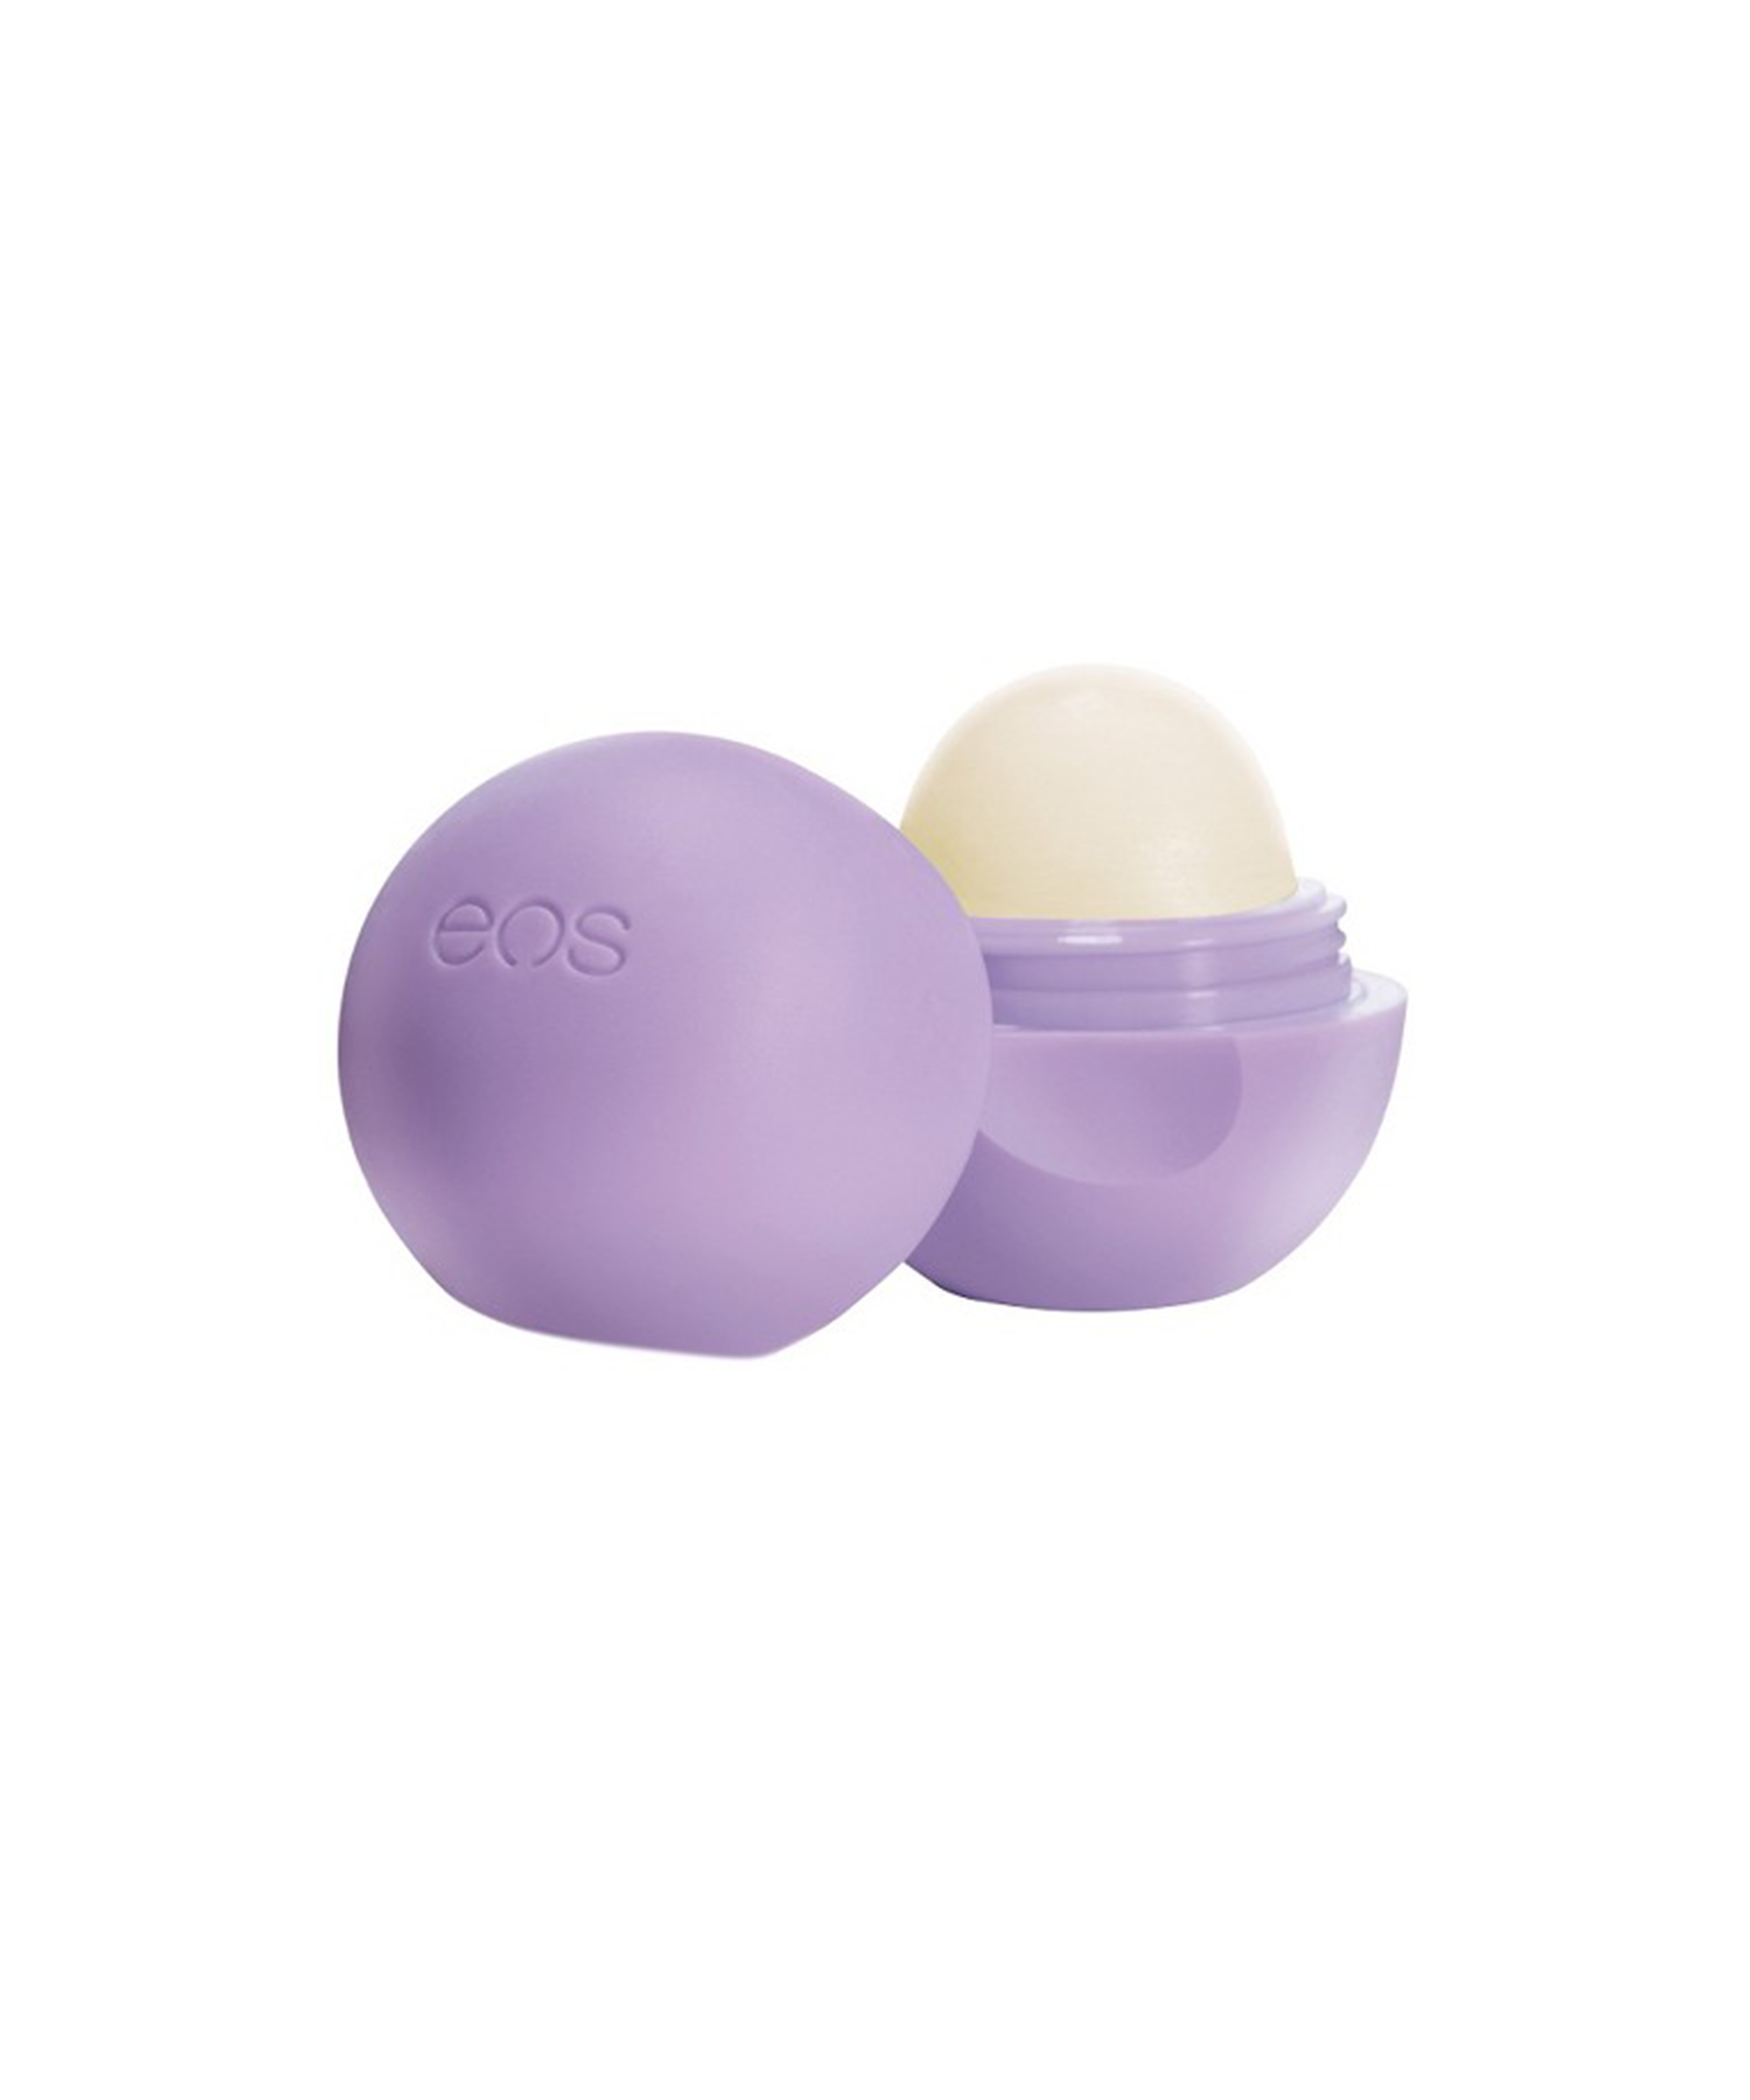 9 lip balms that get the job done for less than $5